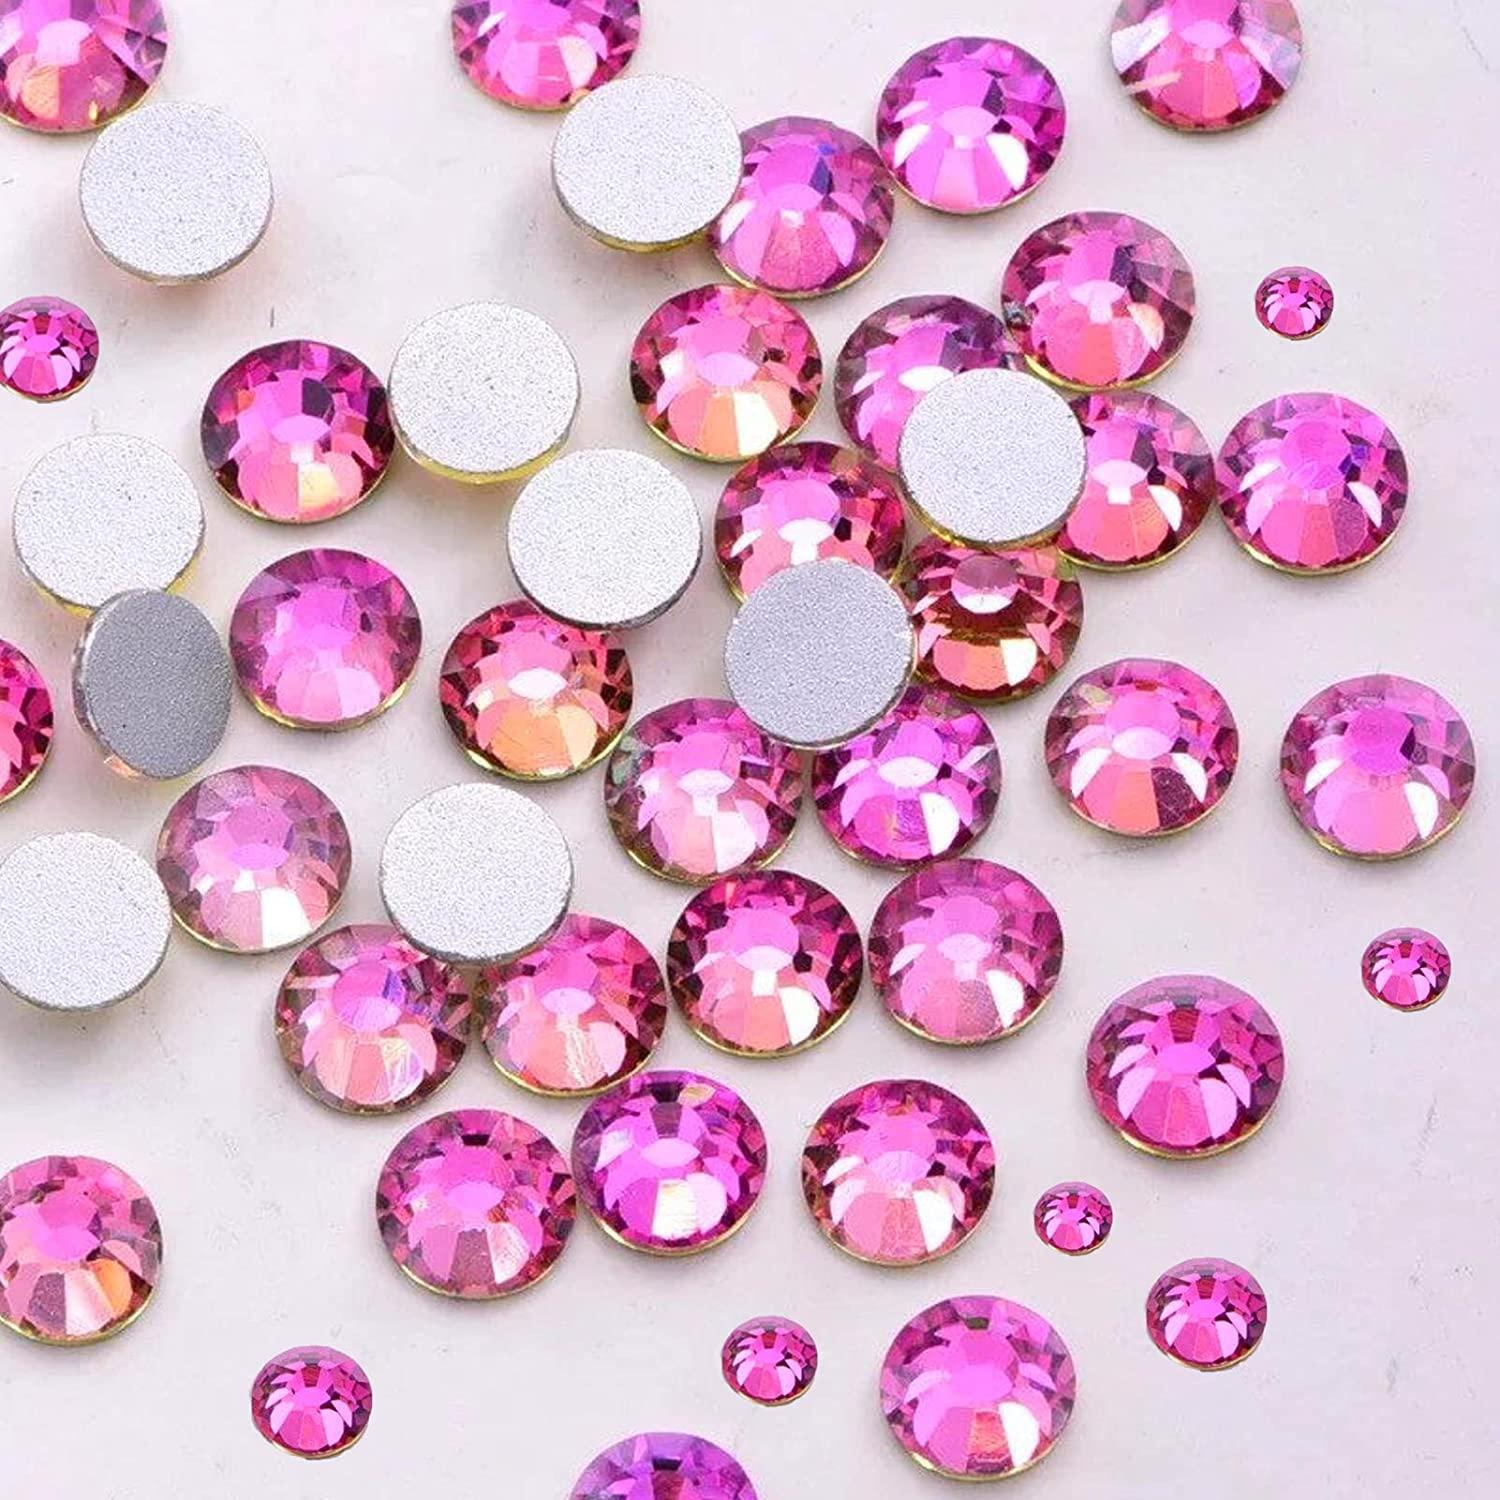 Dowarm 2650 Pieces Glass Flat Back Crystal Rhinestones Round Gems, 6 Sizes  1.5mm - 6.5mm, Flatback Crystals Loose Gemstones for Crafts Nail Face Art  Clothes Jewelry (Rose Vitrail)